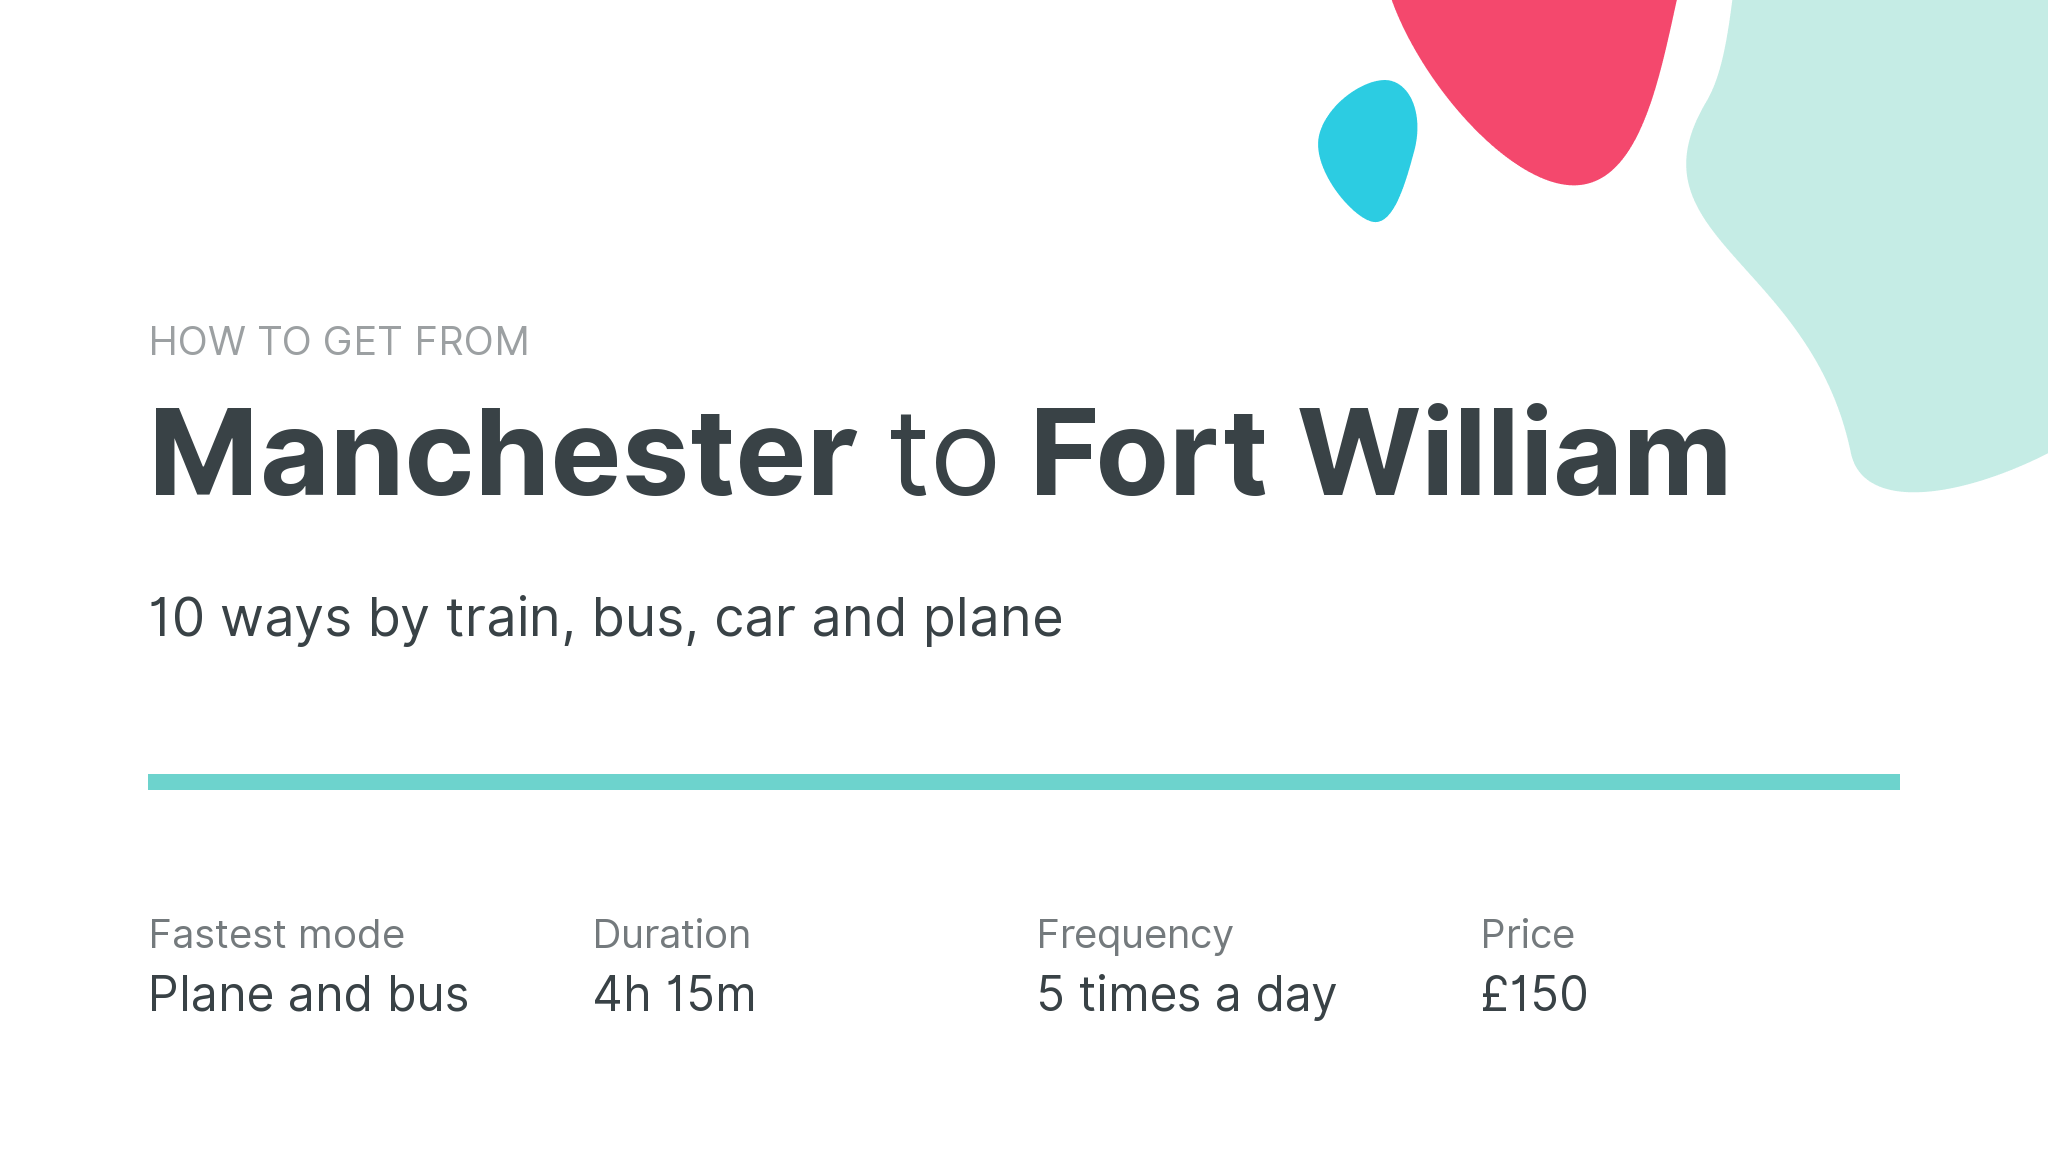 How do I get from Manchester to Fort William